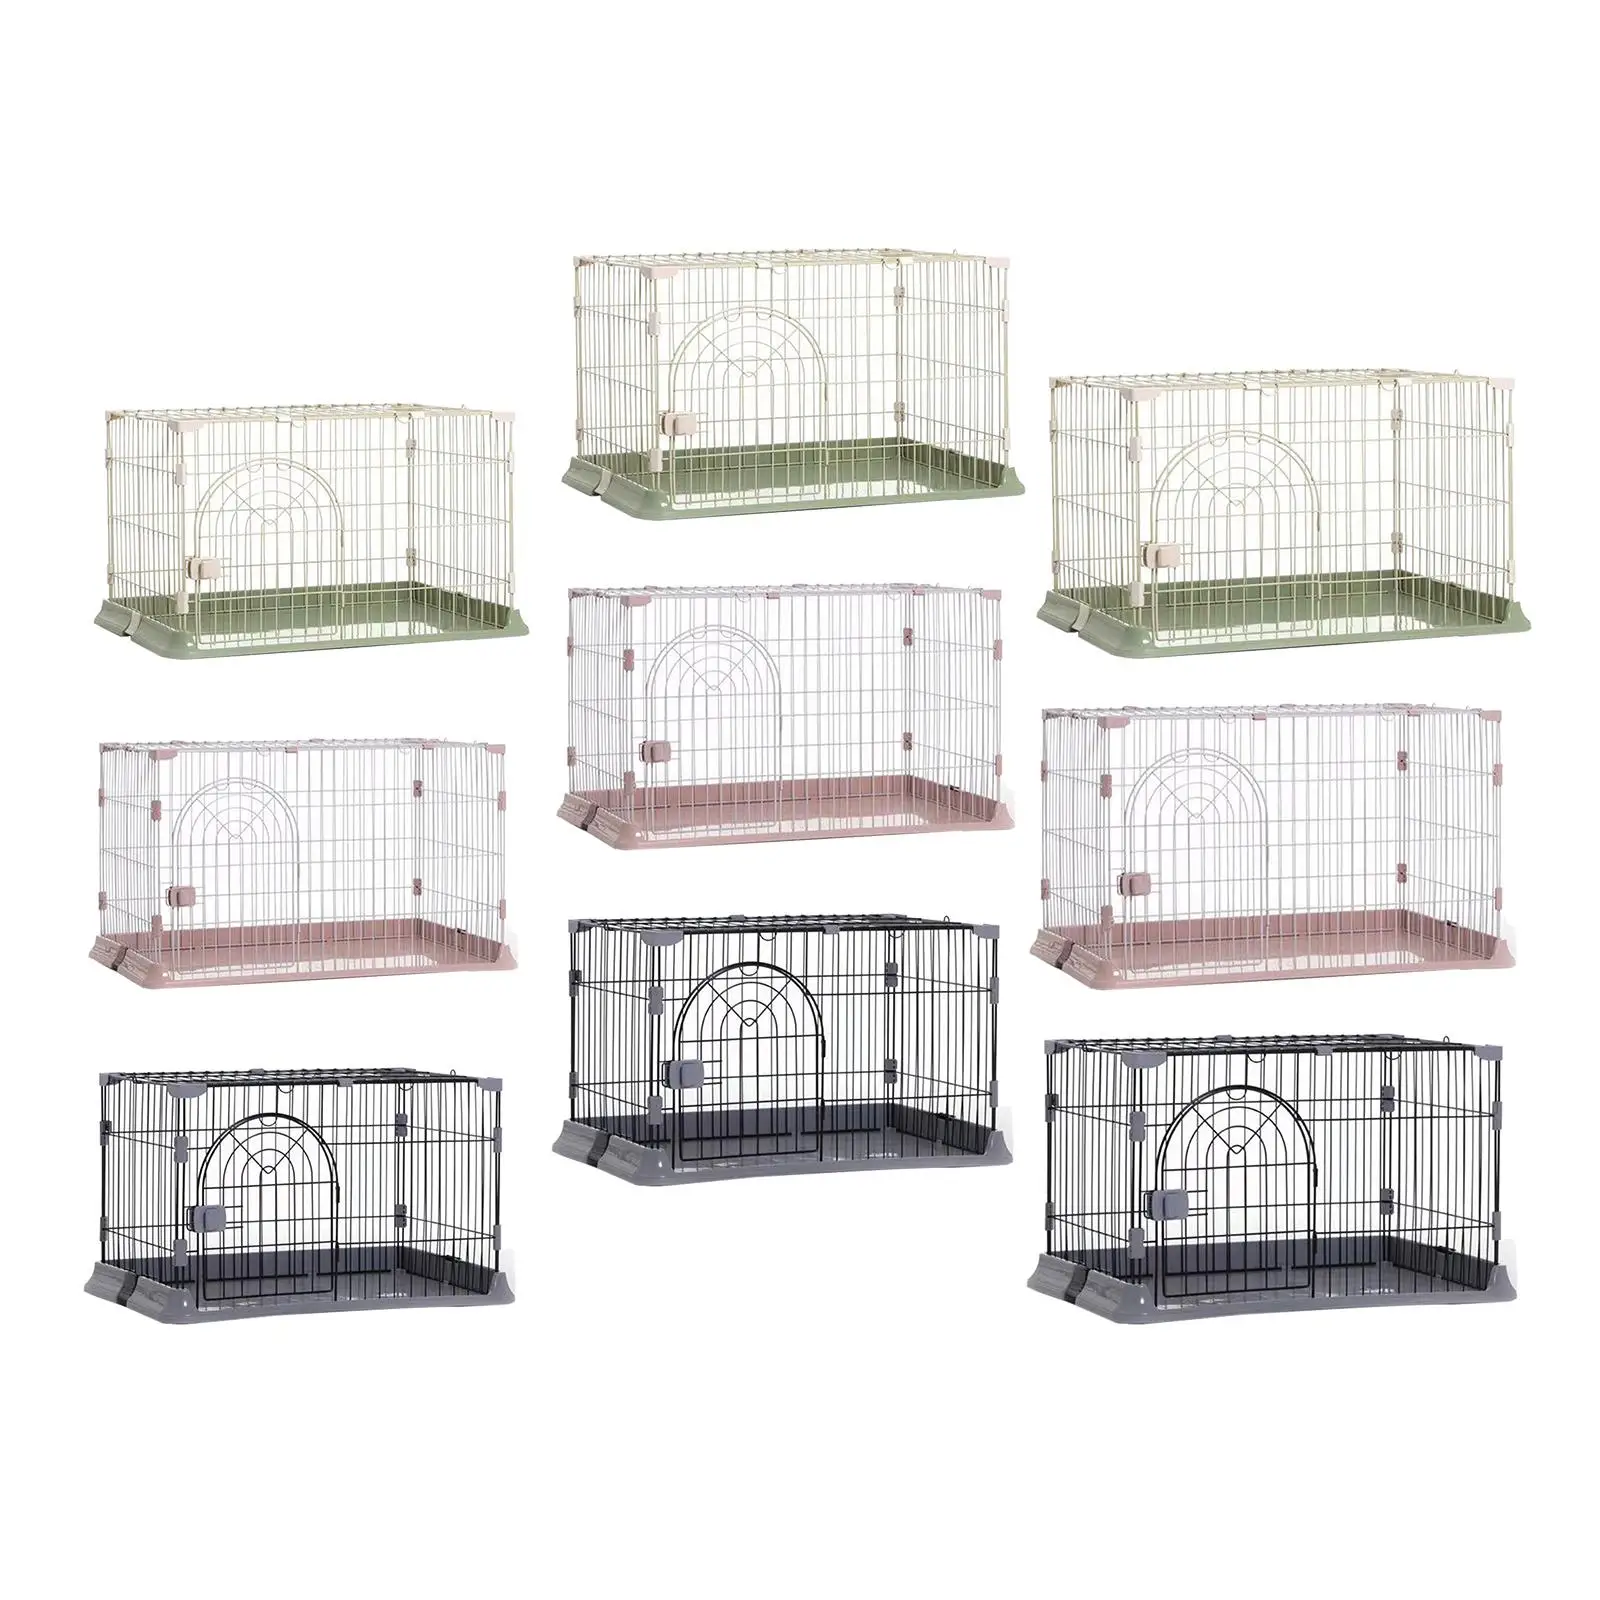 Dog Cage Dog Crate Cover Heavy Duty Reusable Portable Flat Door with Tray Box for Dogs Cat Travel Puppy Training Pet Carrier